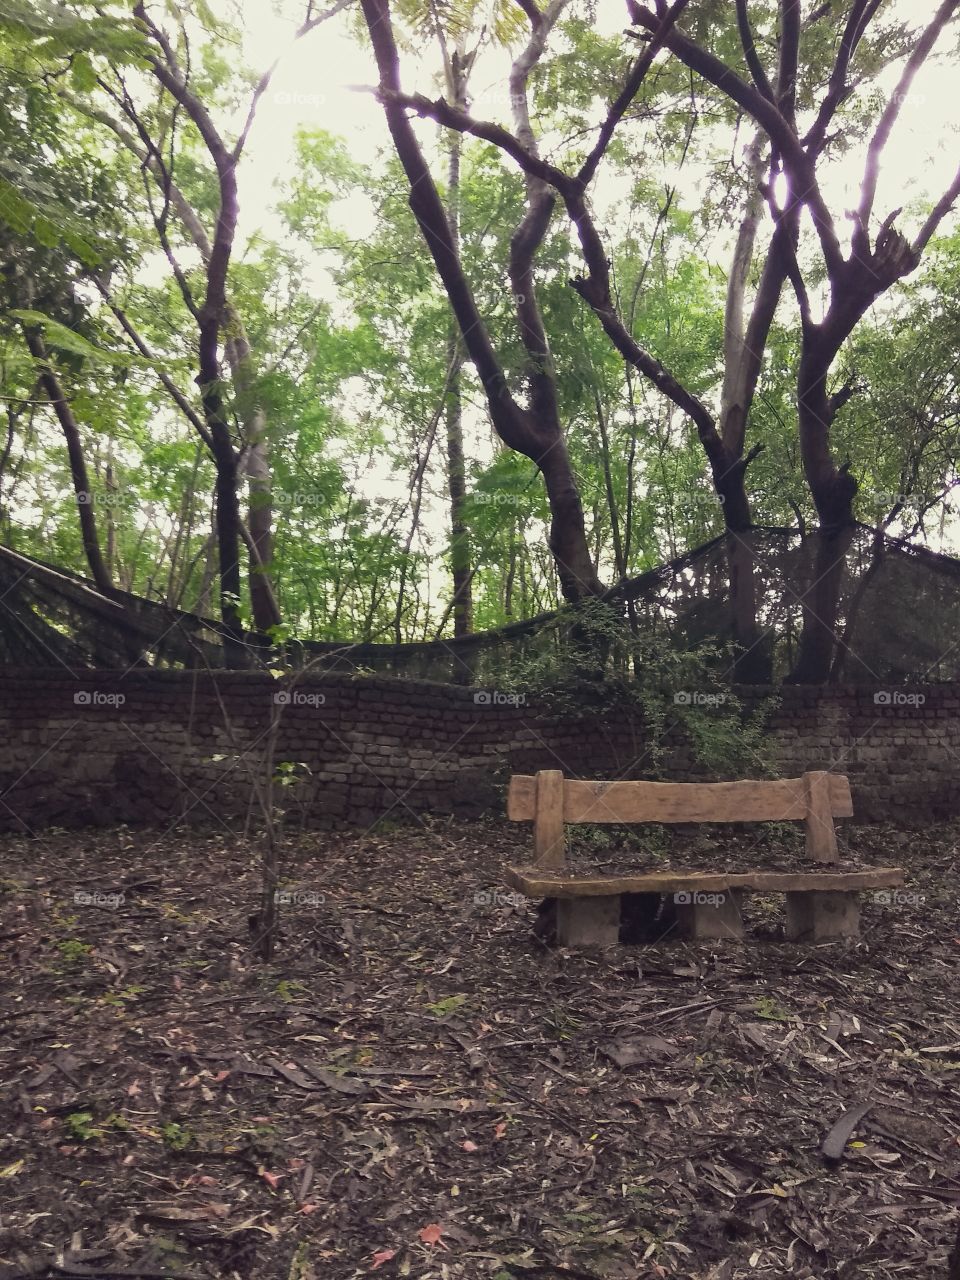 An old bench in a park